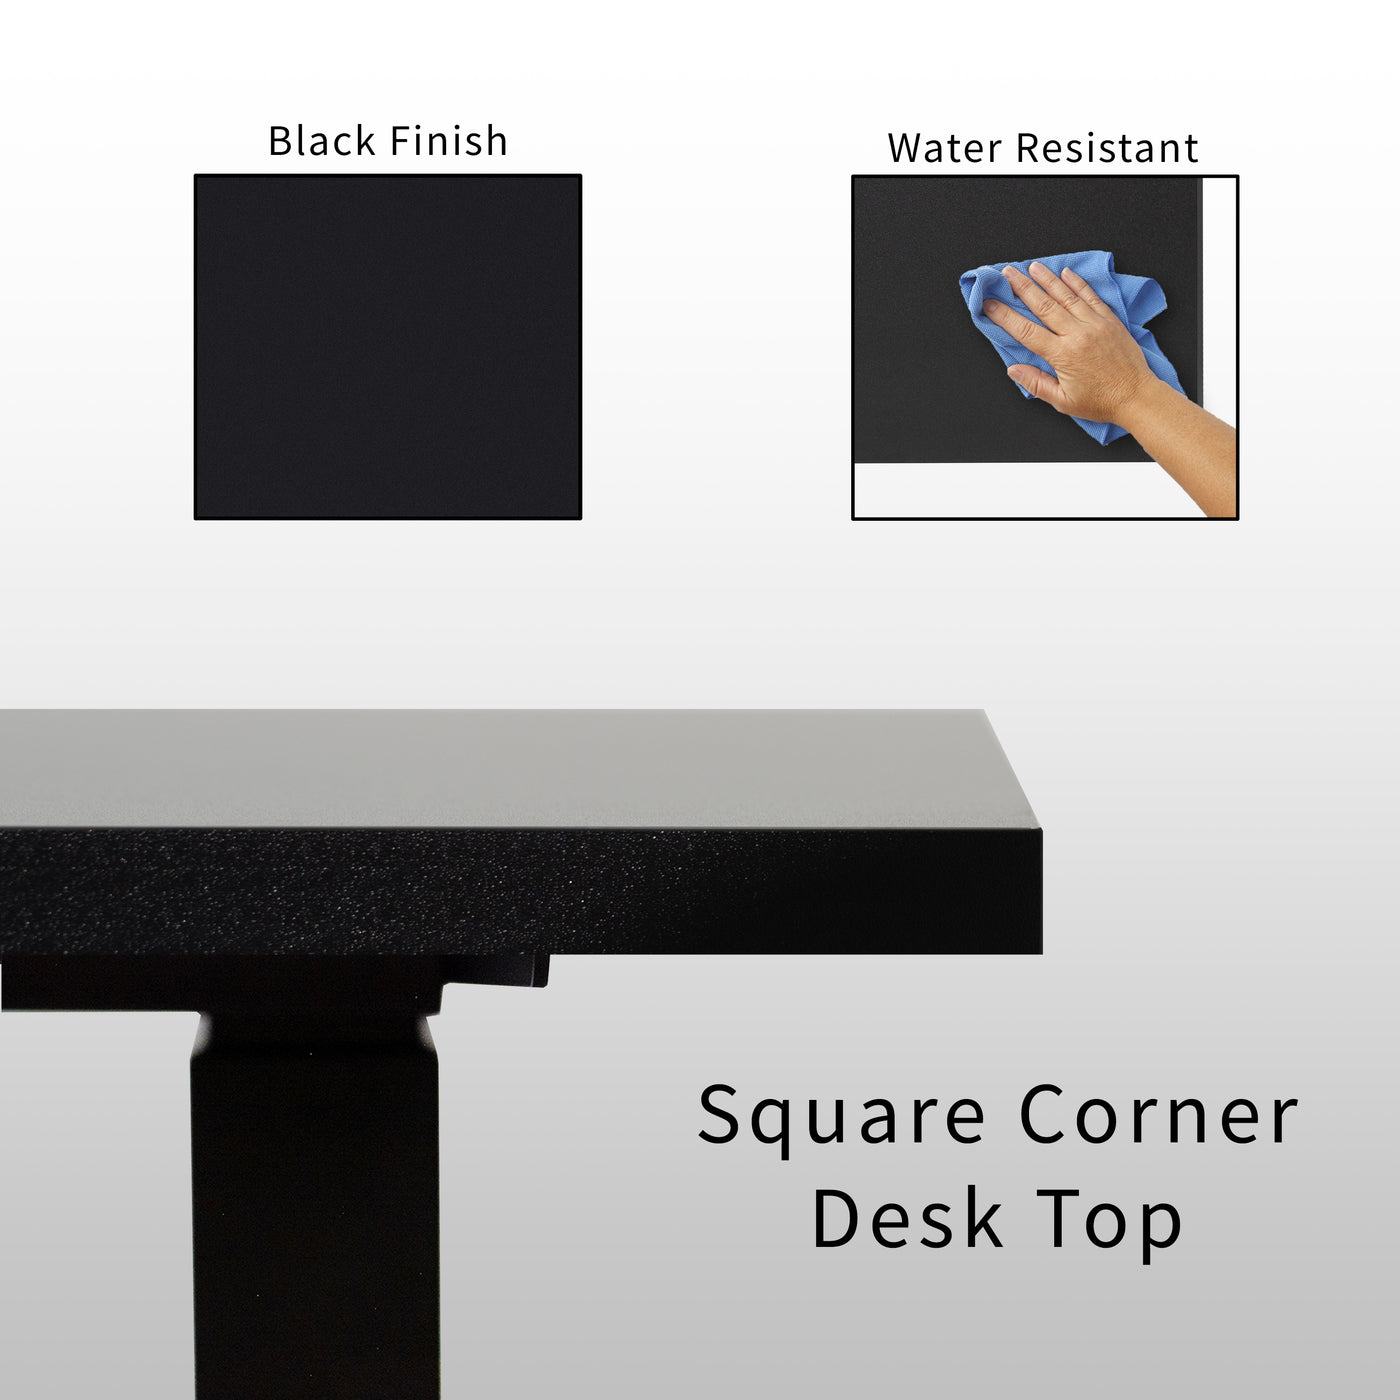 Large electric heavy-duty corner desk workstation with square corners.